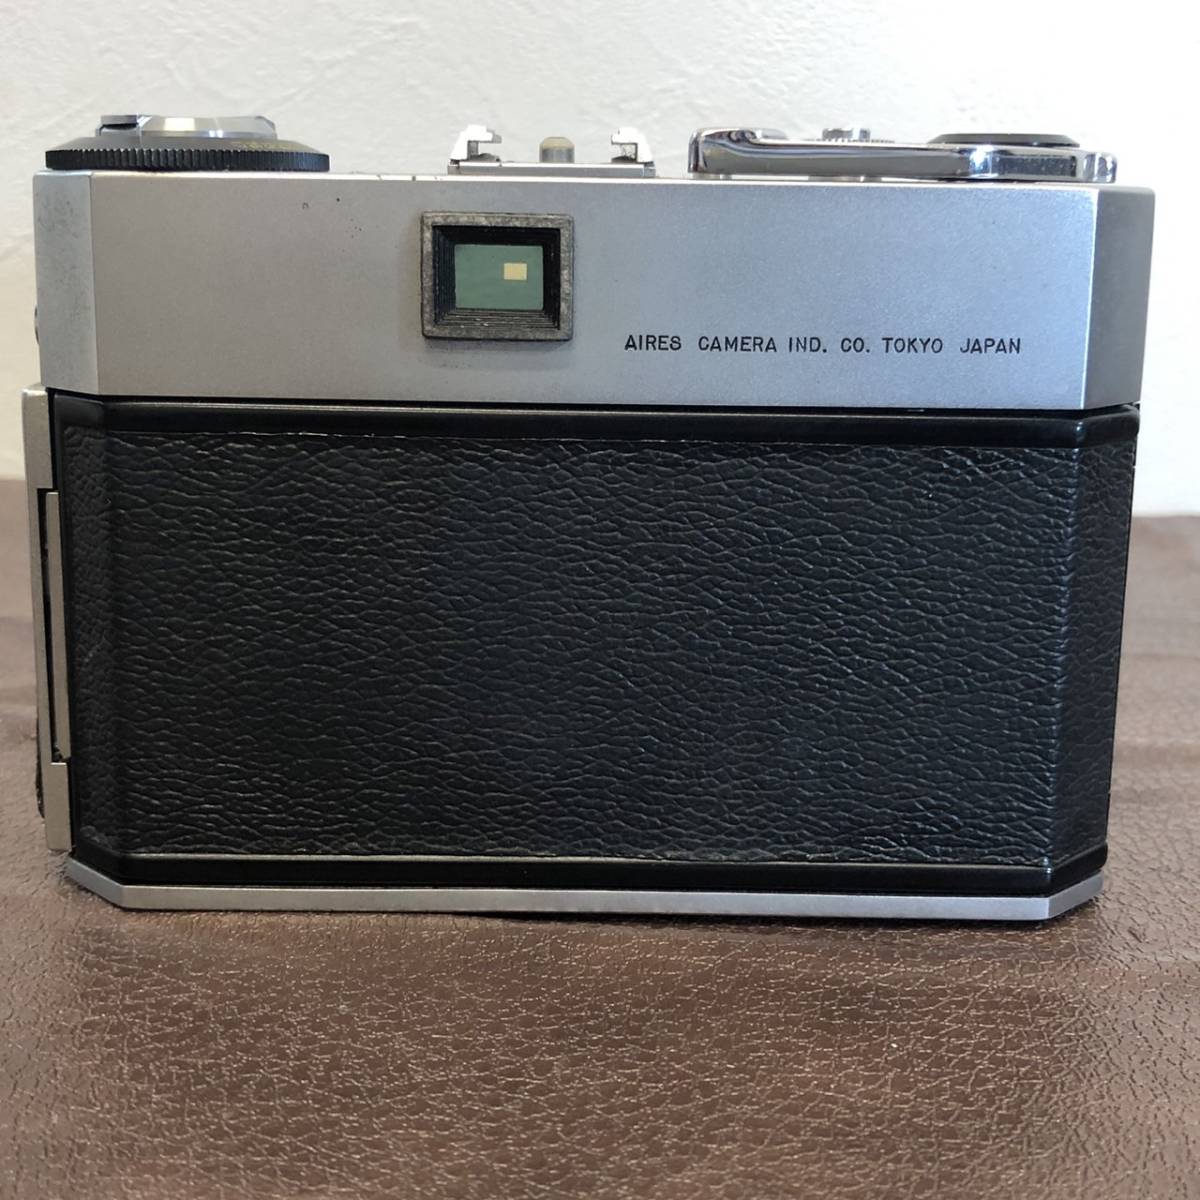 【MH-5300】中古品 AIRES 35 ⅢS アイレス フィルムカメラ H CORAL 1:1.8 f=4.5cm _画像4